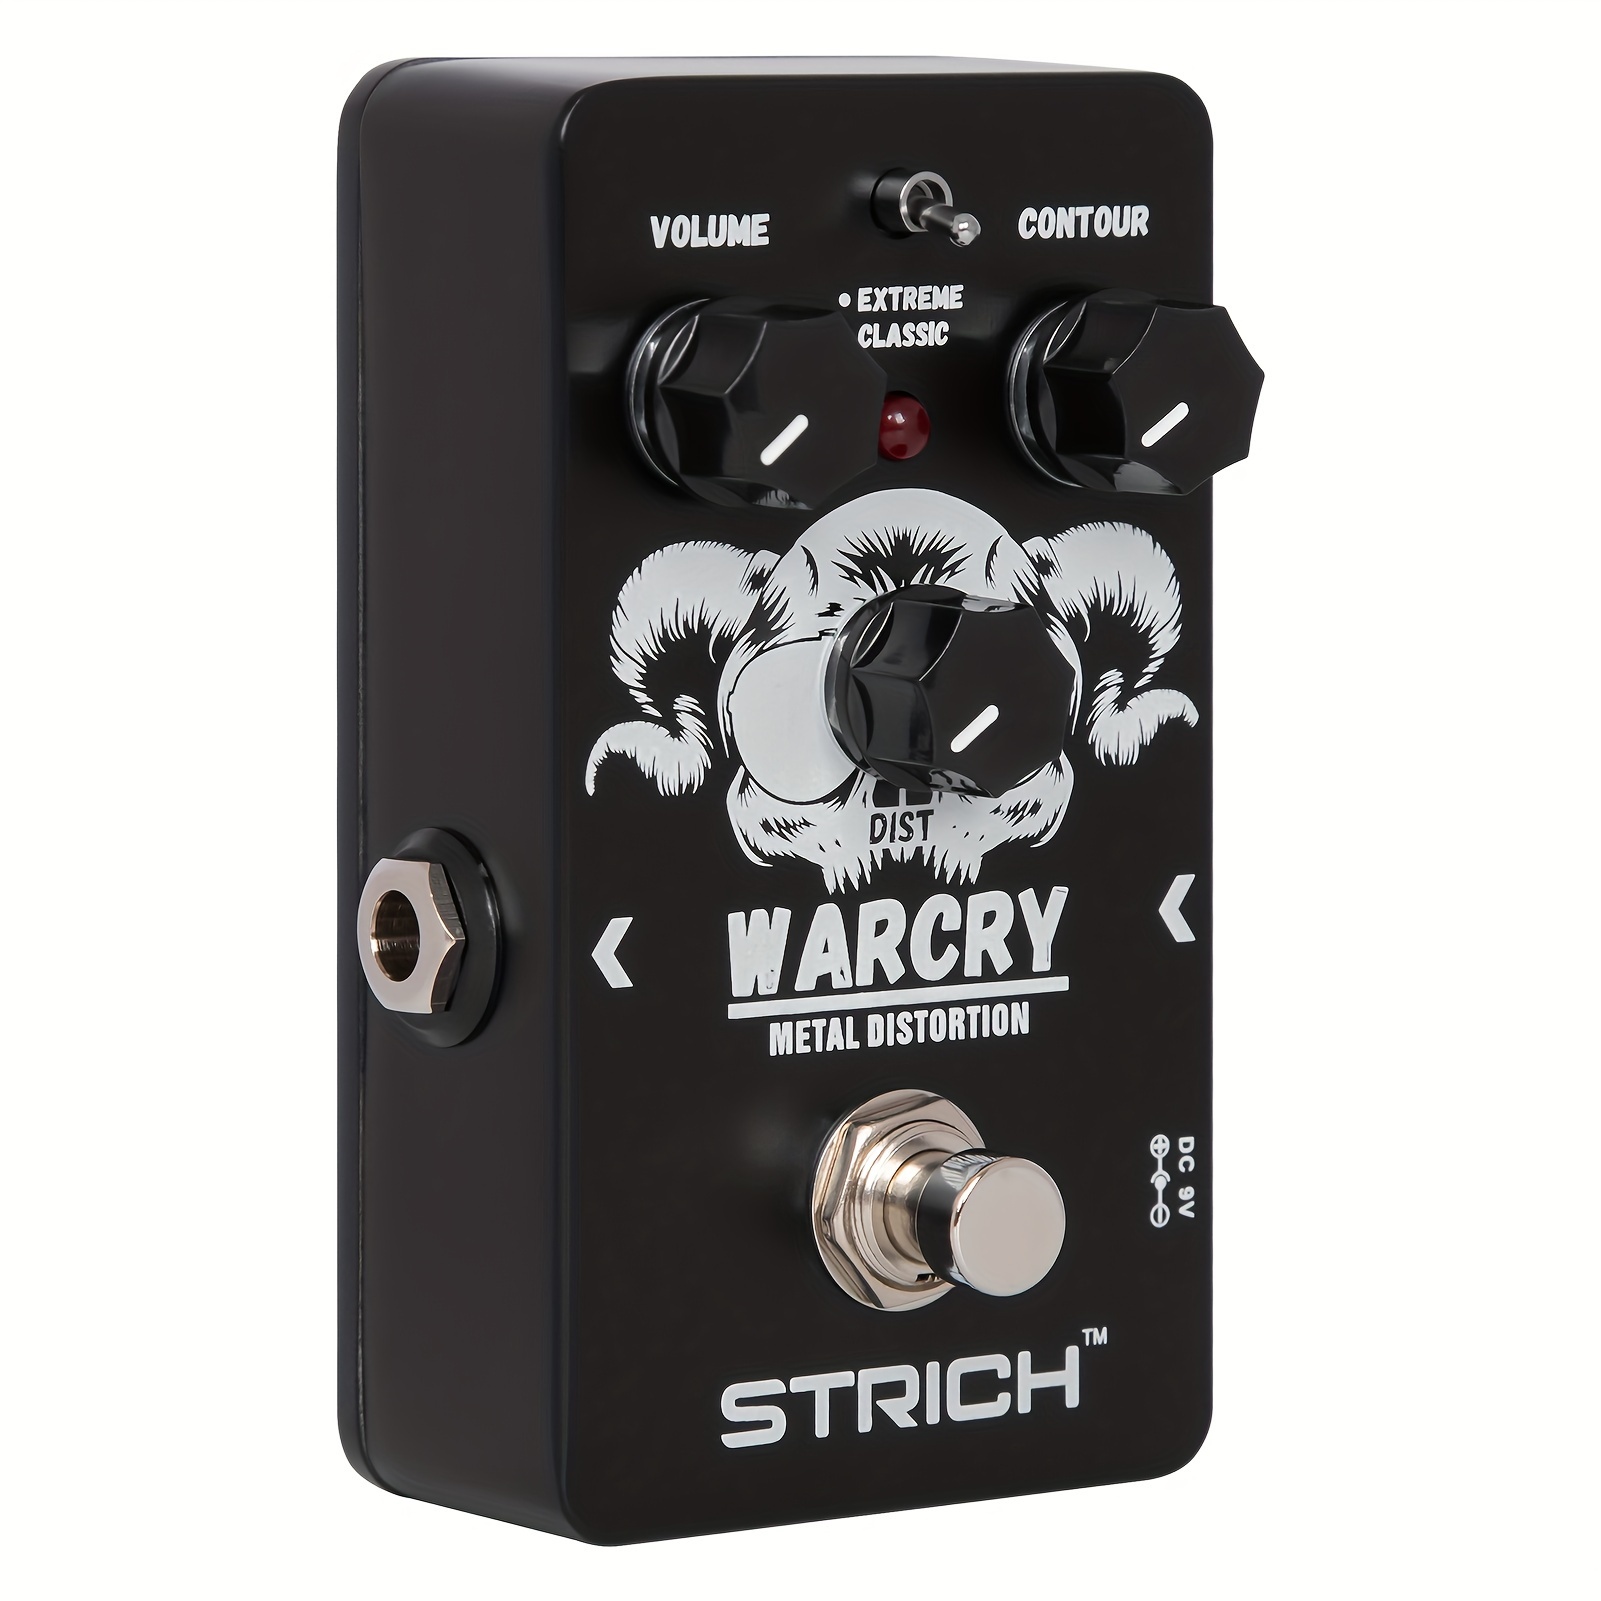 

Strich Metal Distortion Guitar Pedal, Distortion 2 Modes Fat, Boost, Normal Classic 80s Metal/nu Metal, True Bypass For Electric Guitar, Black And White